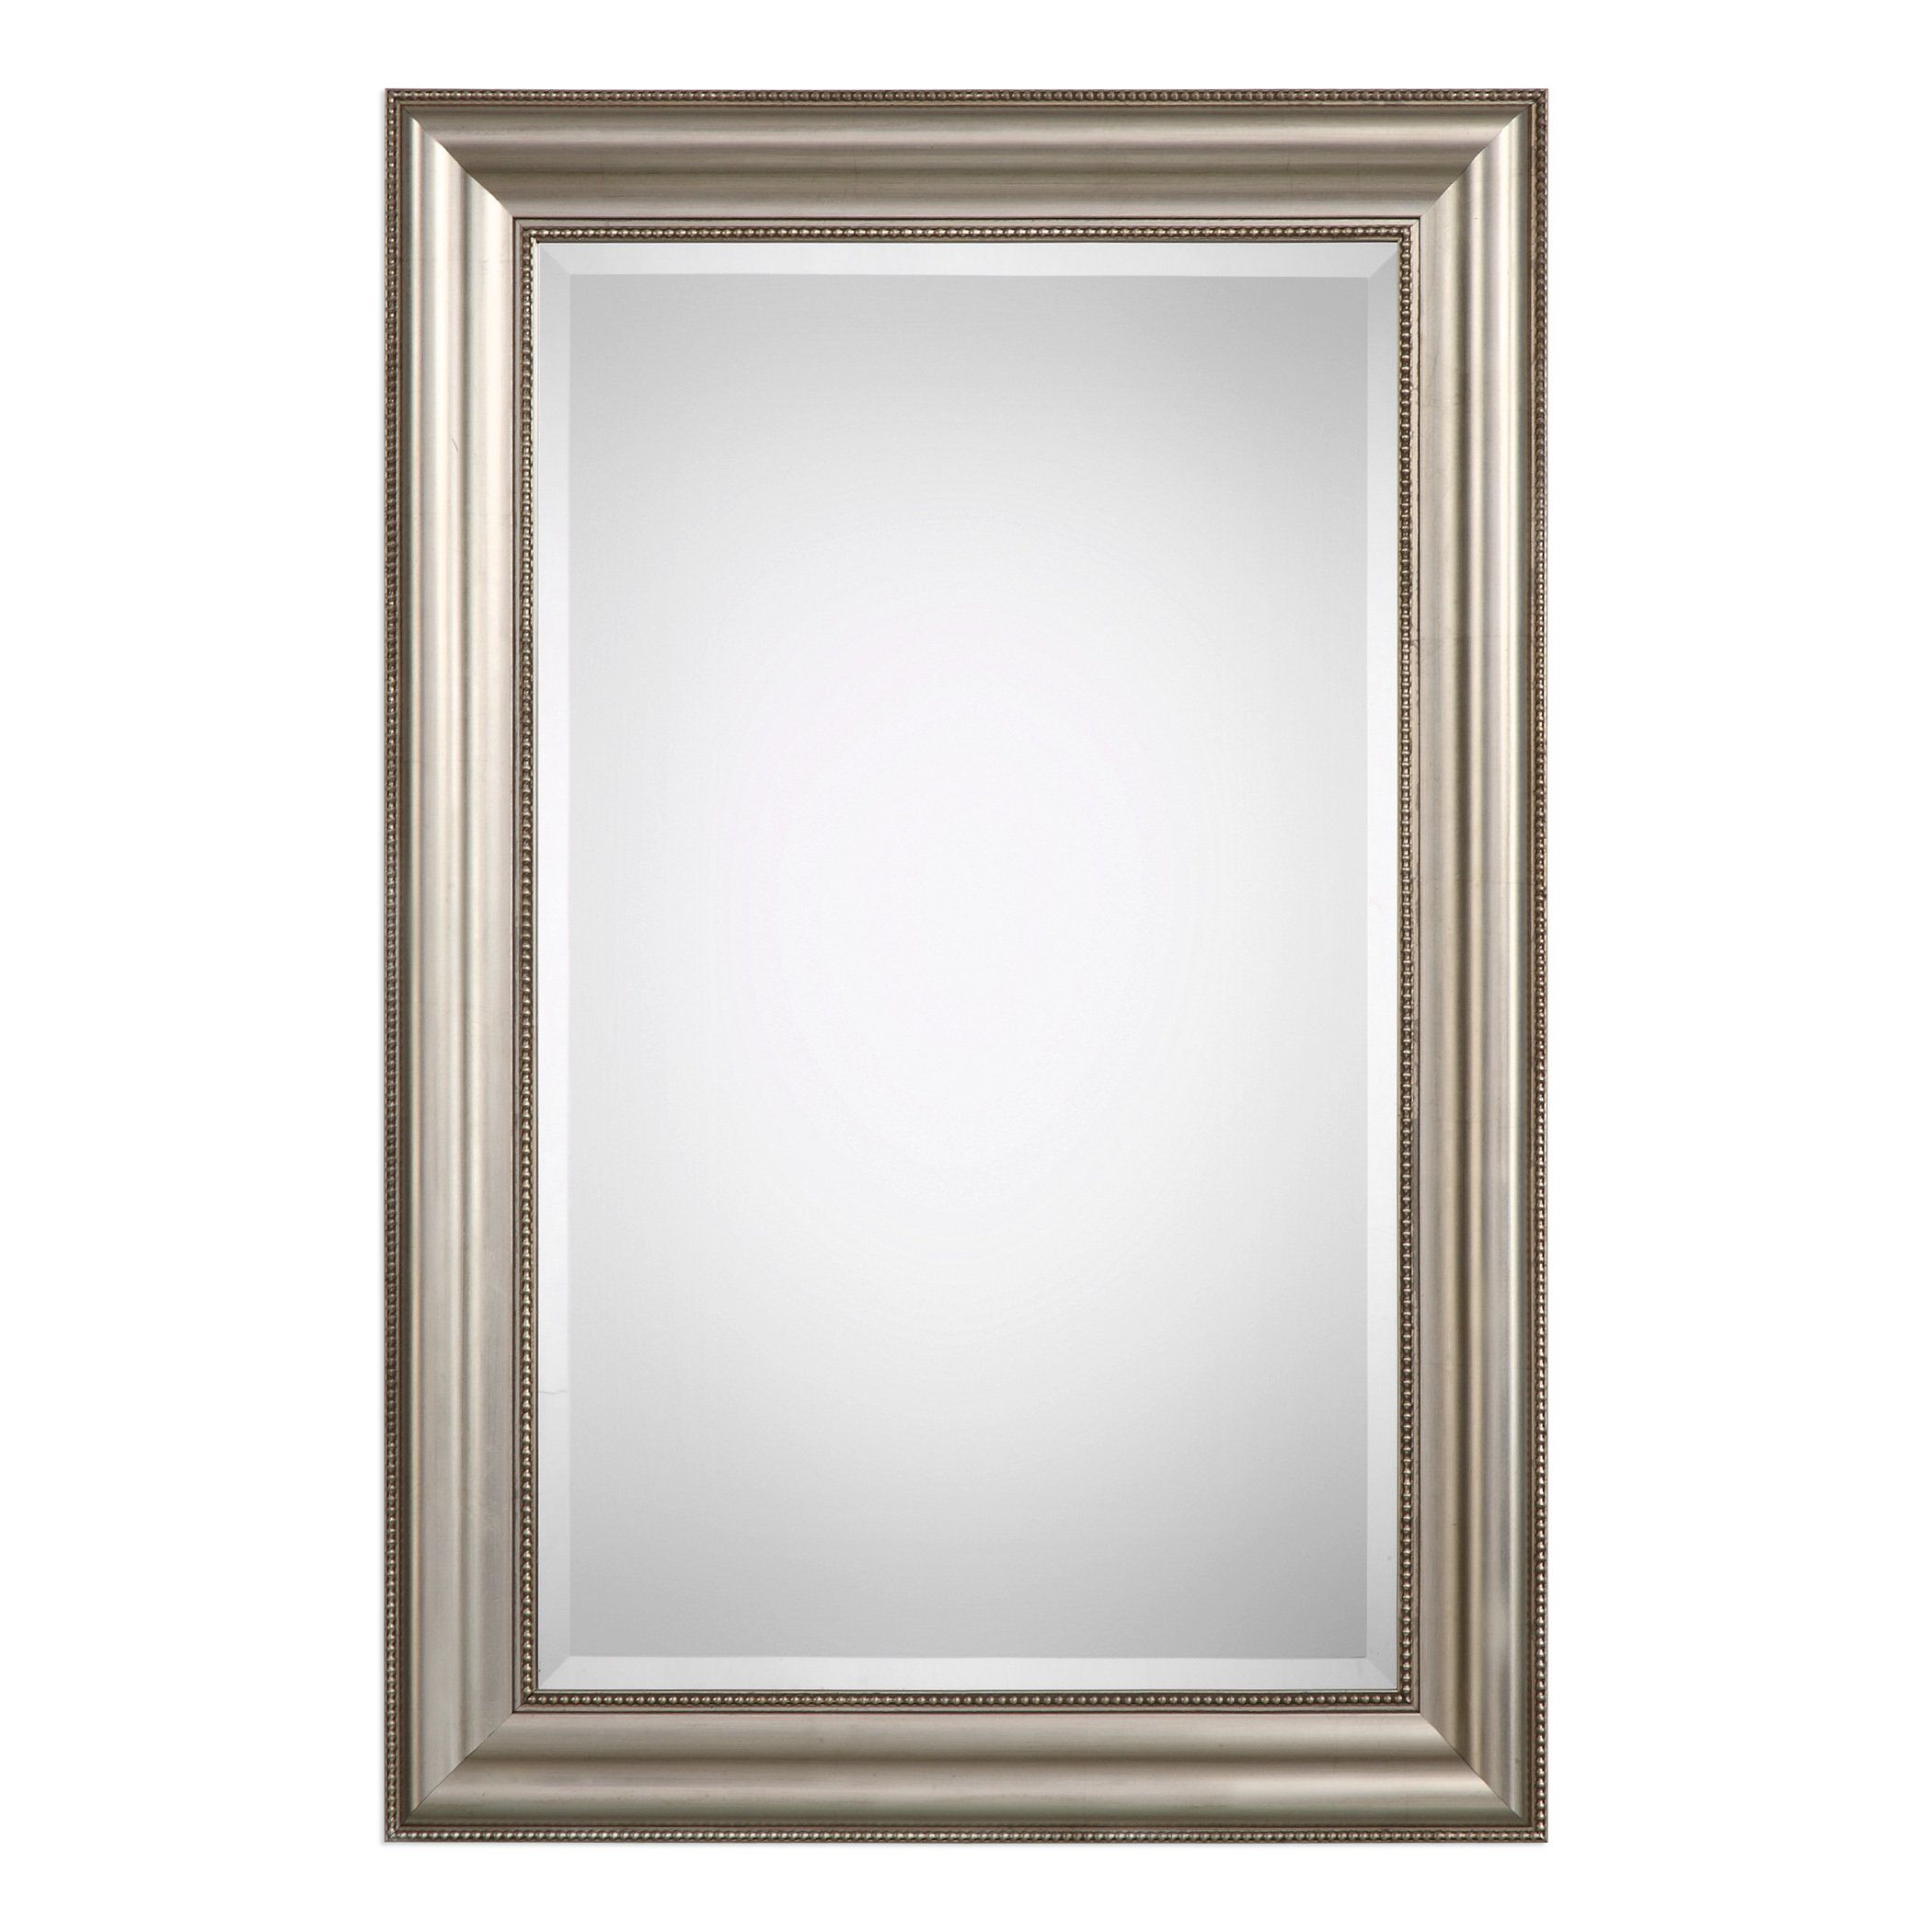 Farmhouse Mirrors | Birch Lane With Regard To Longwood Rustic Beveled Accent Mirrors (View 9 of 20)